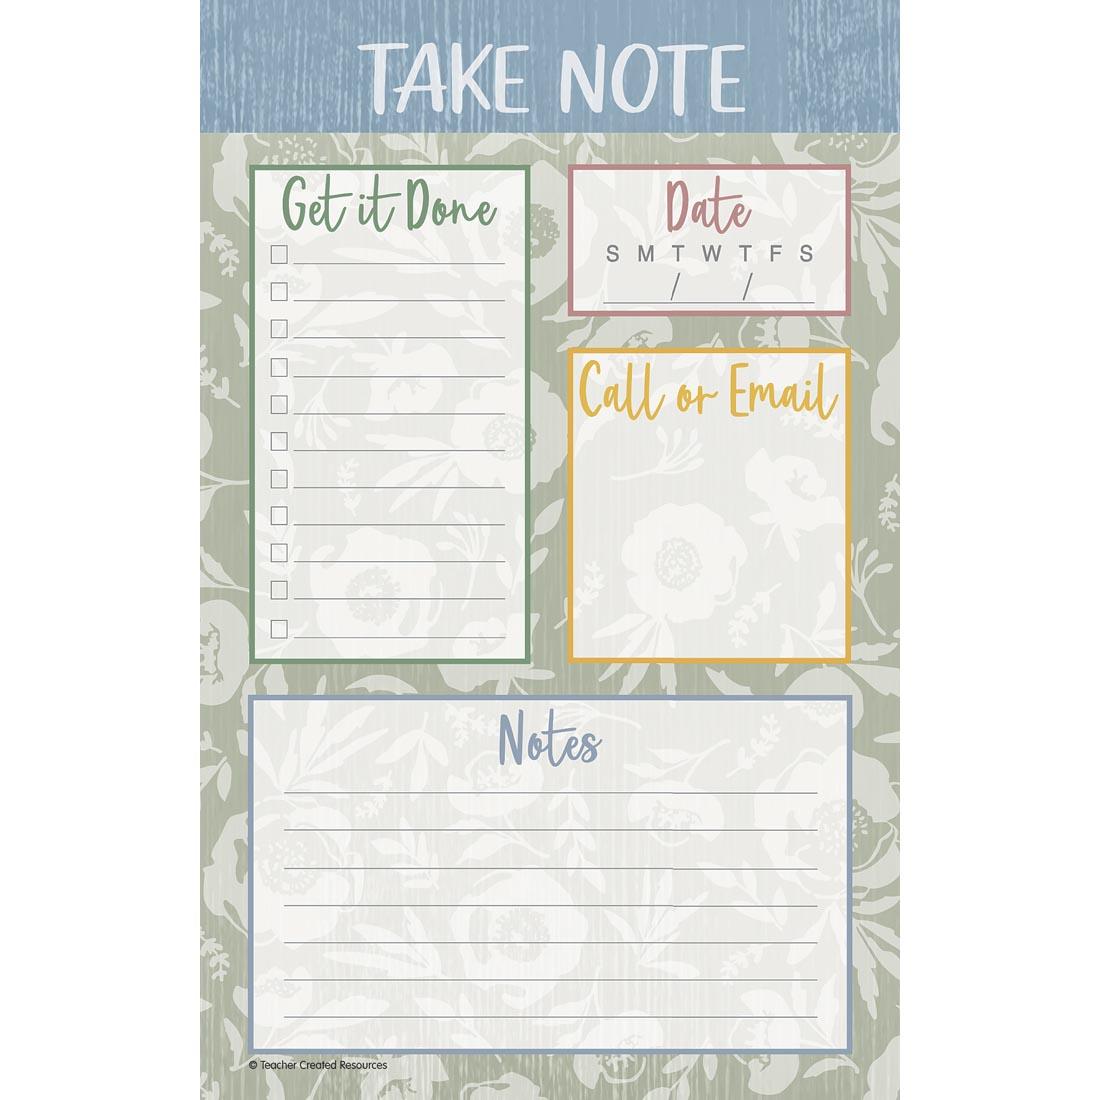 Notepad from the Classroom Cottage collection by Teacher Created Resources